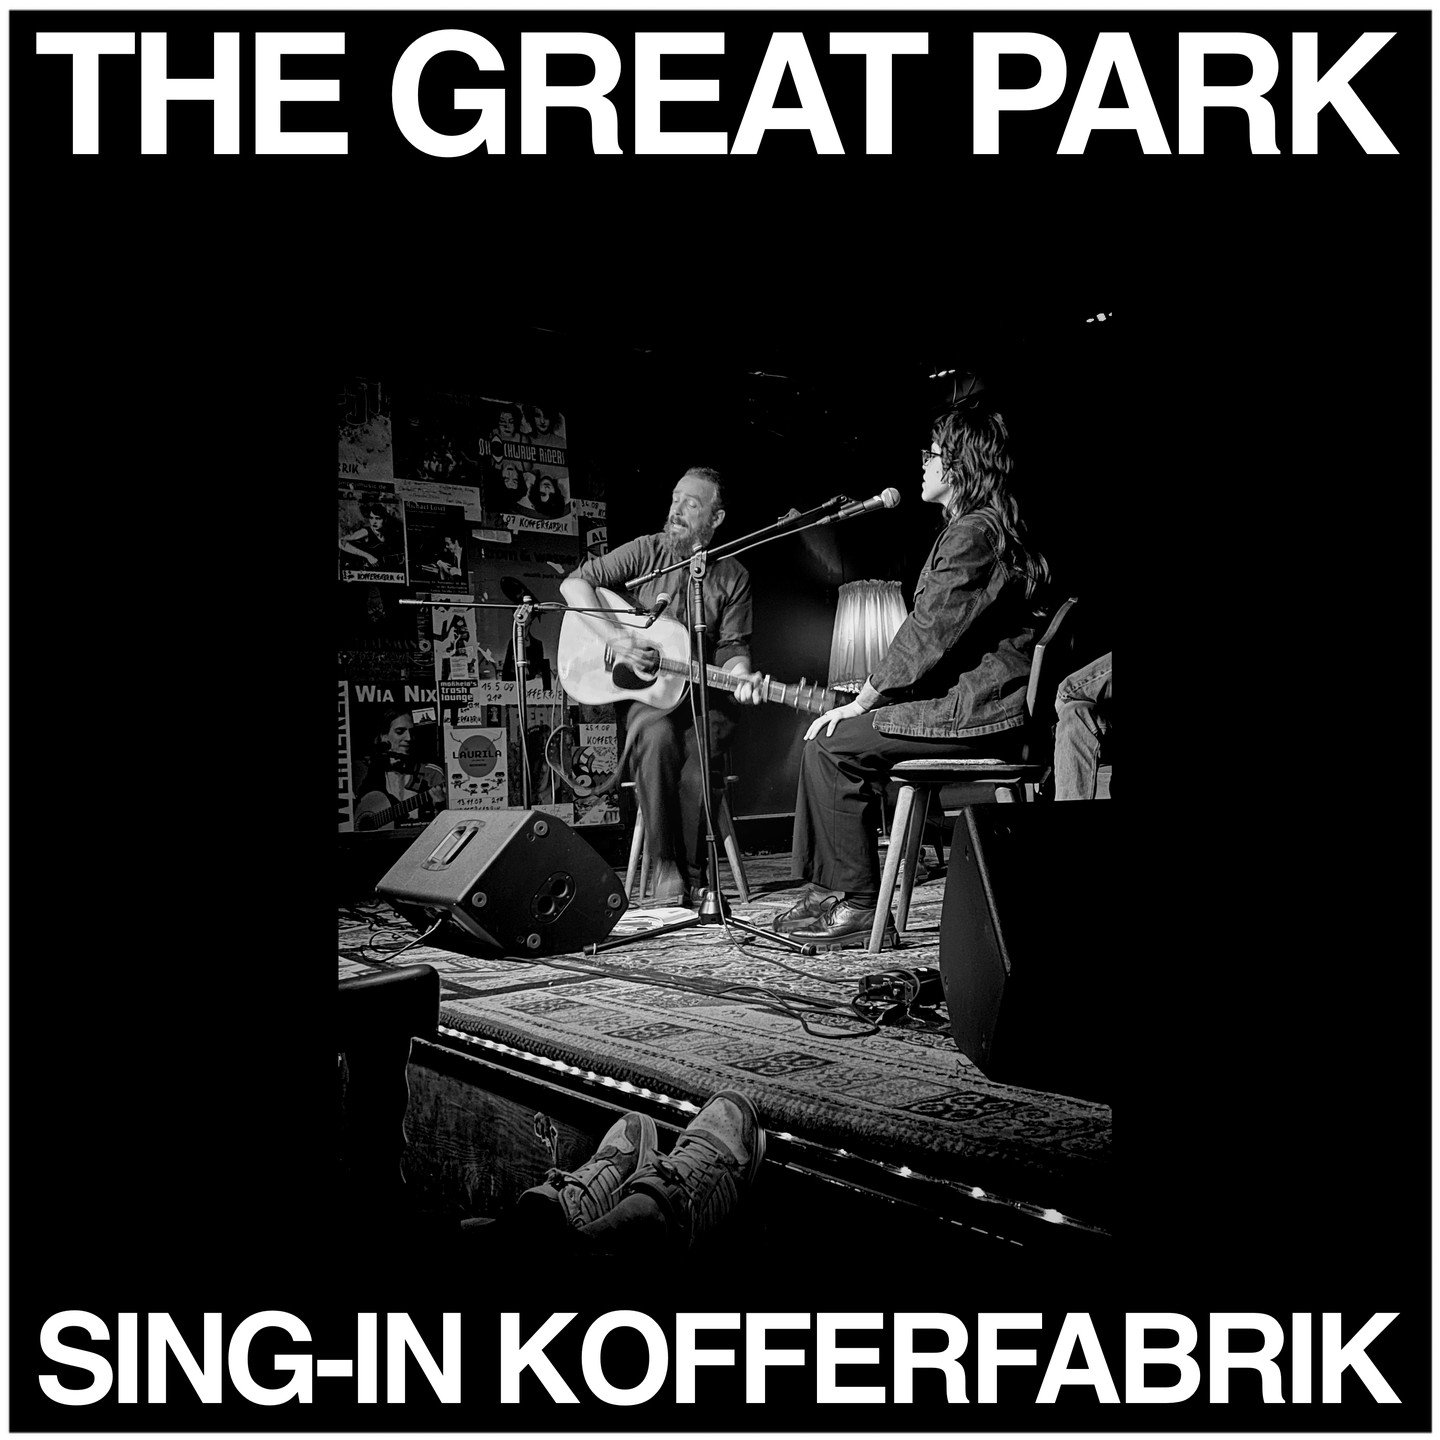 The second of two recordings out today for #bandcampfriday is this free / pay what you like download of a noisy and very fun 3 song set from the @sing_in_open_mic_sunday at the @kofferfabrik in F&uuml;rth last Sunday, featuring @julialauramusic on al